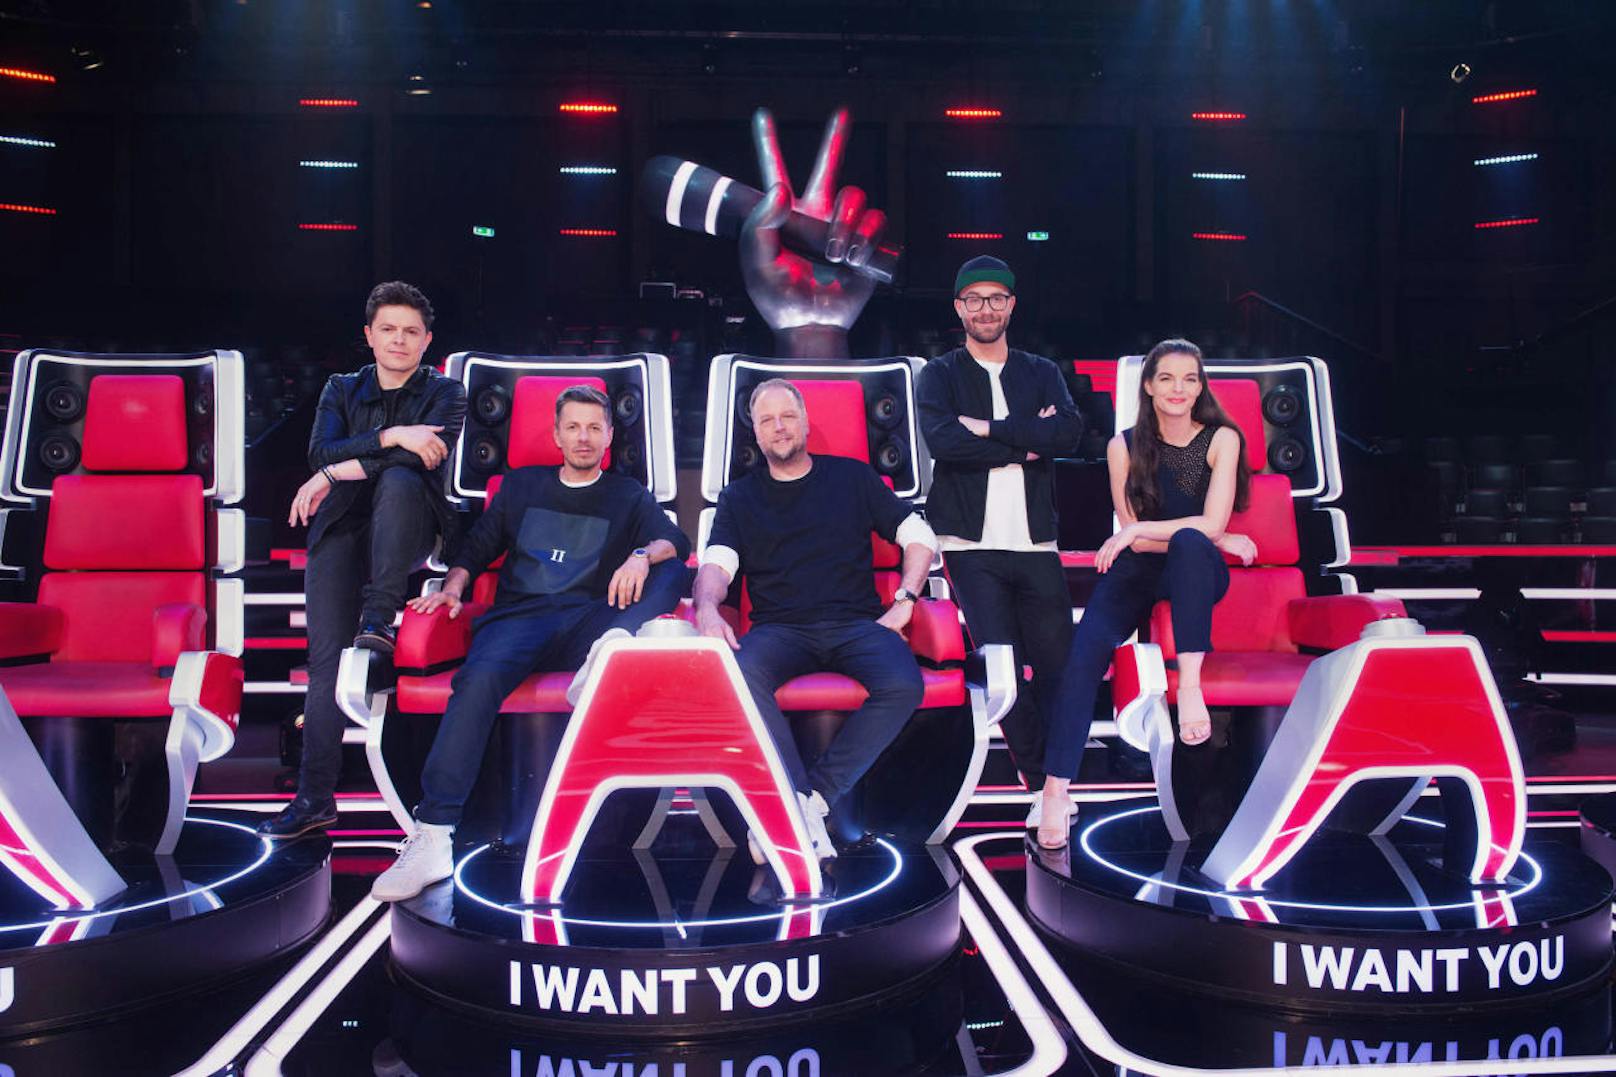 8. Staffel: Neu dabei ist Michael Patrick Kelly (ganz links) als Coach. Yvonne Catterfeld, Mark Forster, Michi Beck & Smudo sibnd bereits alte Hasen bei "The Voice of Germany"